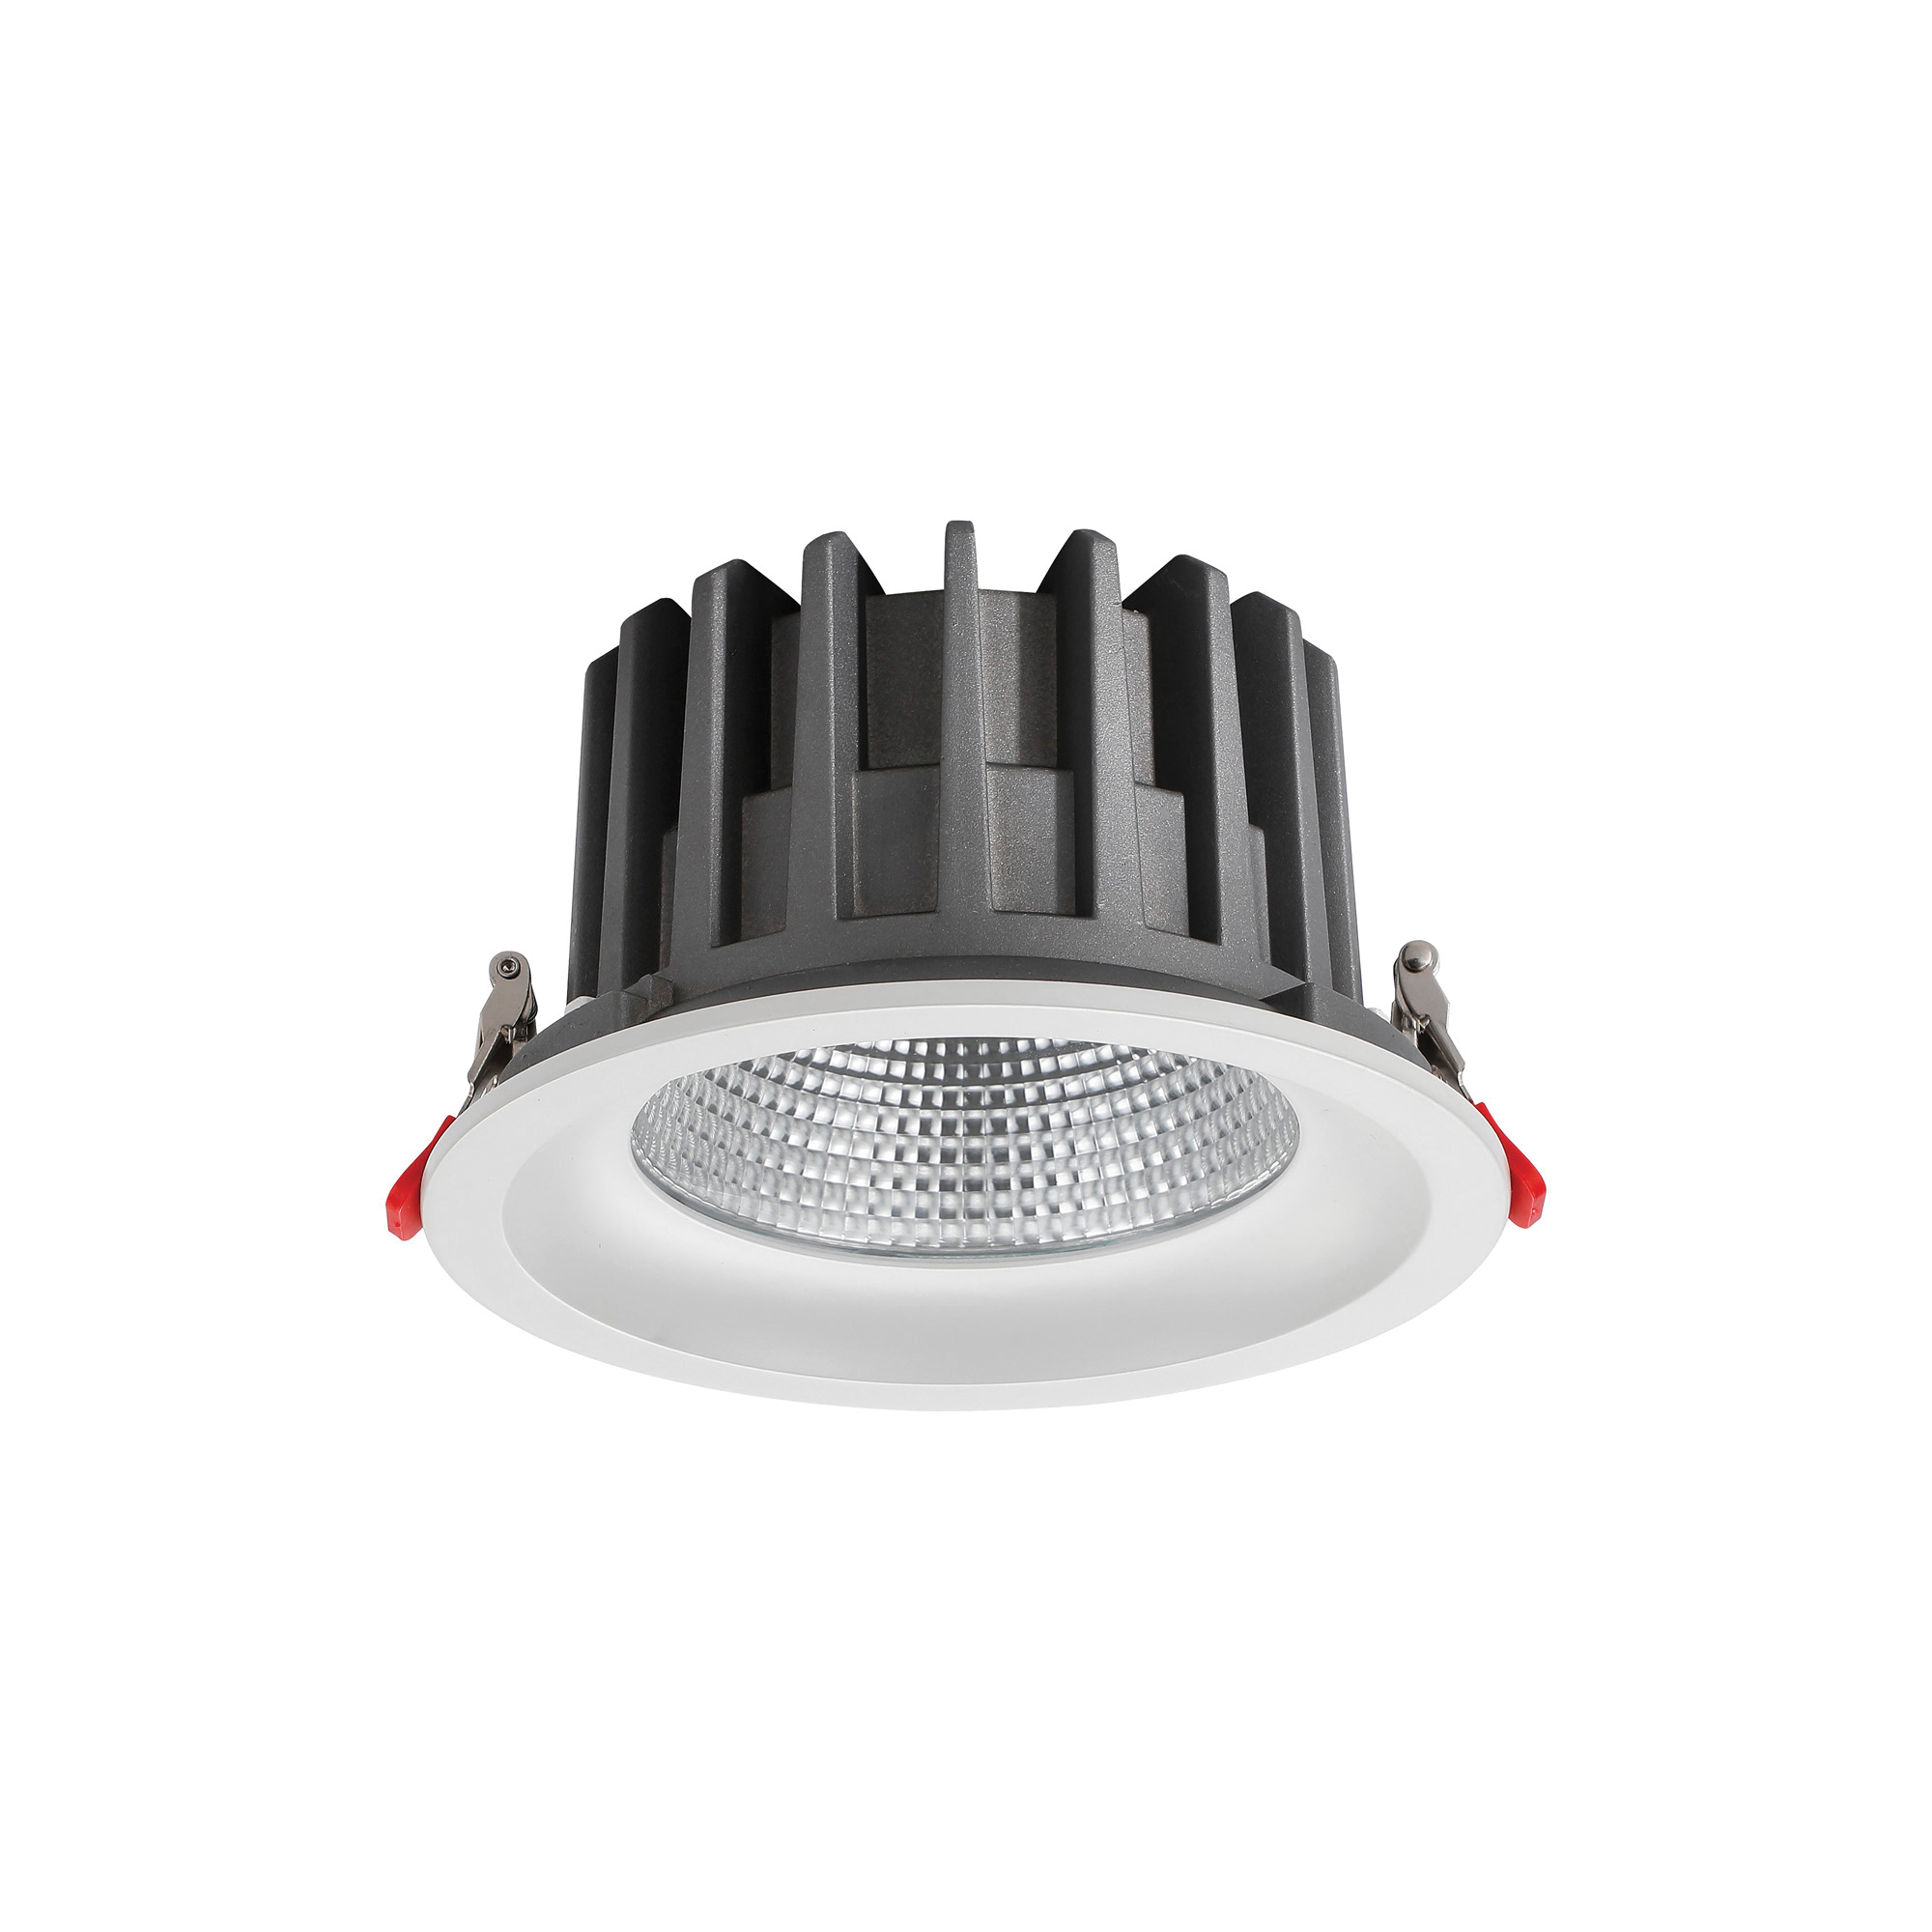 DL200064  Bionic 40, 40W, 1000mA, White Deep Round Recessed Downlight, 3463lm ,Cut Out 175mm, 40° , 3000K, IP44, DRIVER INC., 5yrs Warranty.